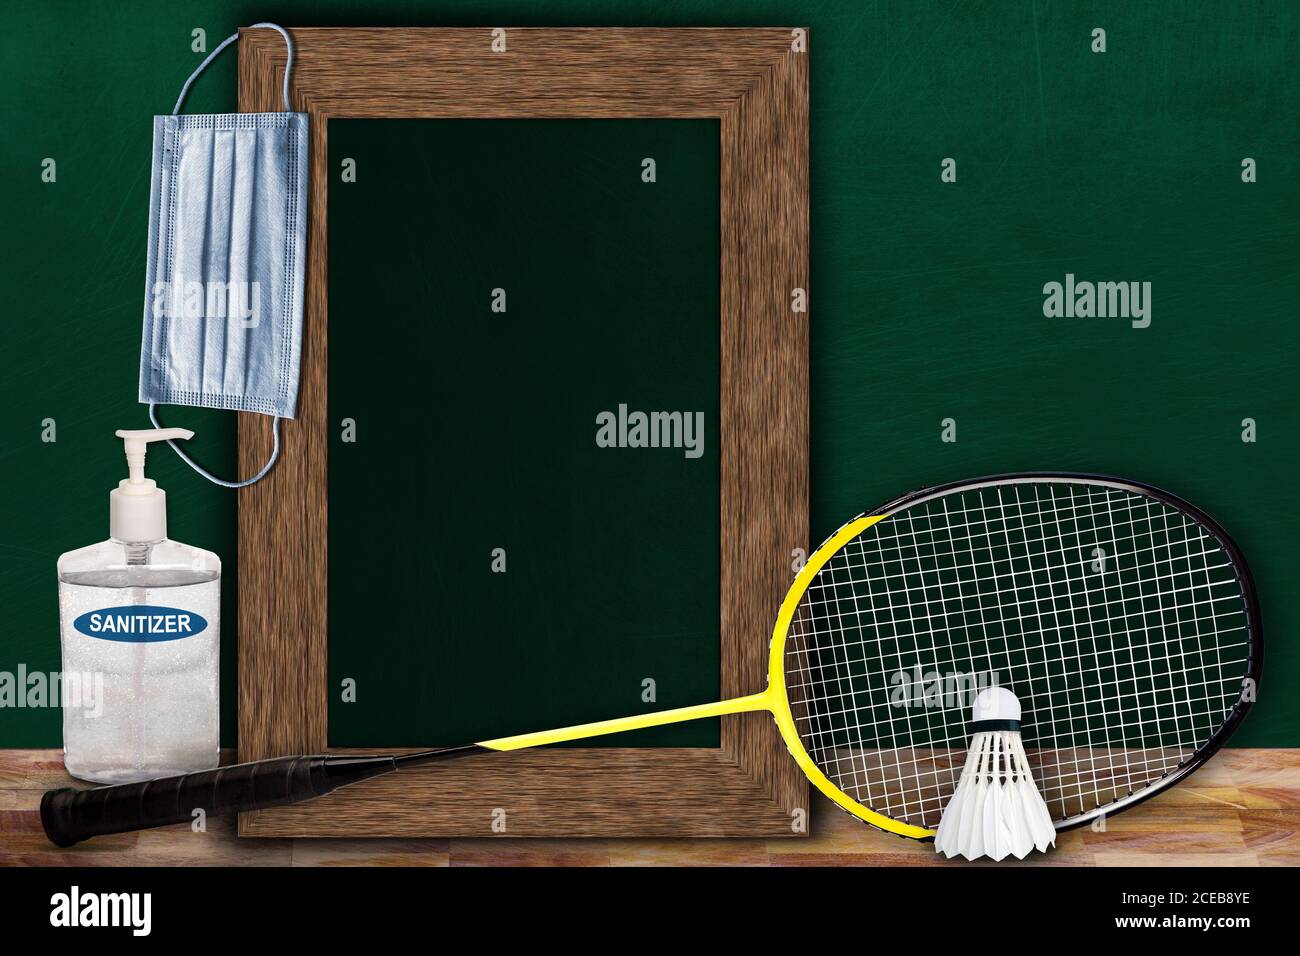 COVID-19 new normal sports concept in a classroom setting showing framed chalkboard with copy space and badminton racket and shuttlecock on wooden tab Stock Photo